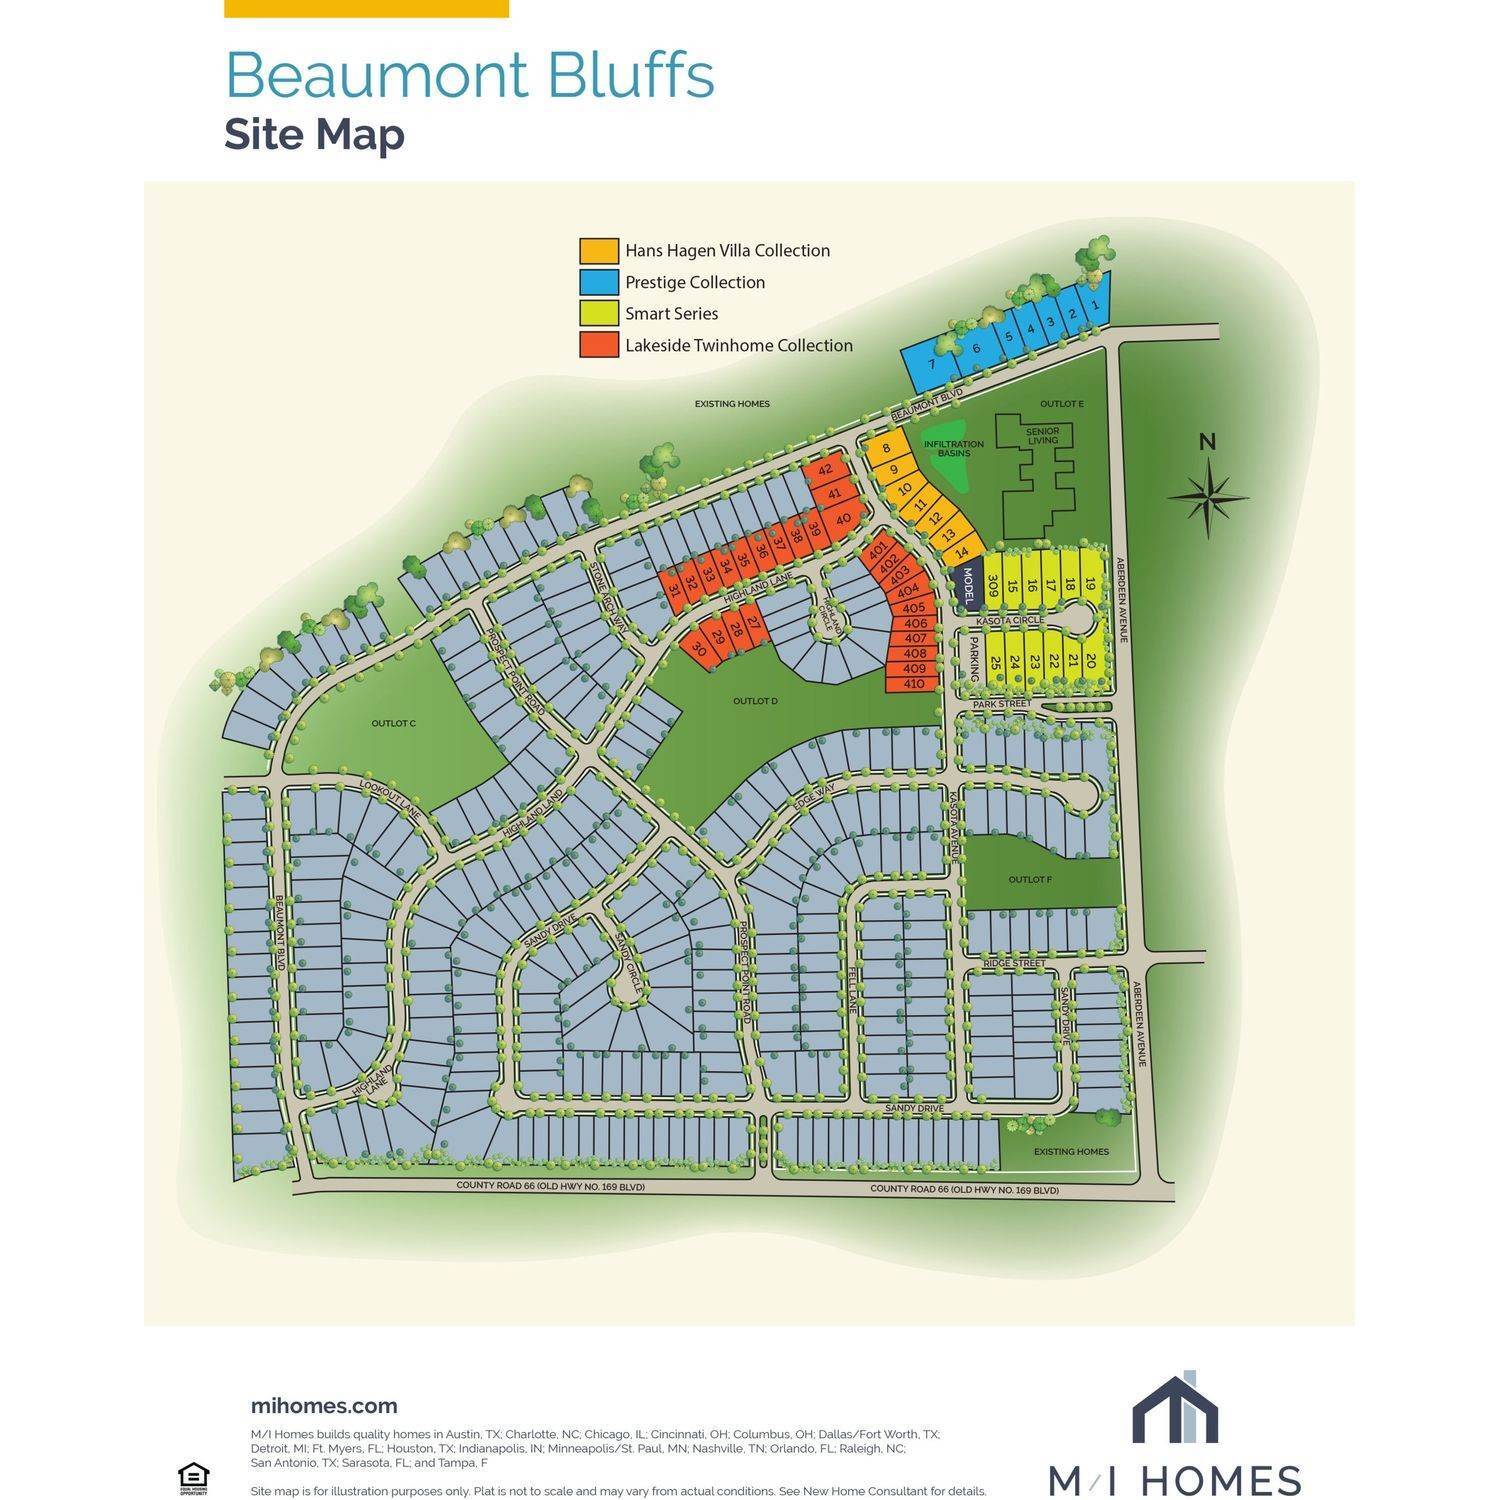 29. Beaumont Bluffs building at Old Hwy 169 & Beaumont Boulevard, Jordan, MN 55352